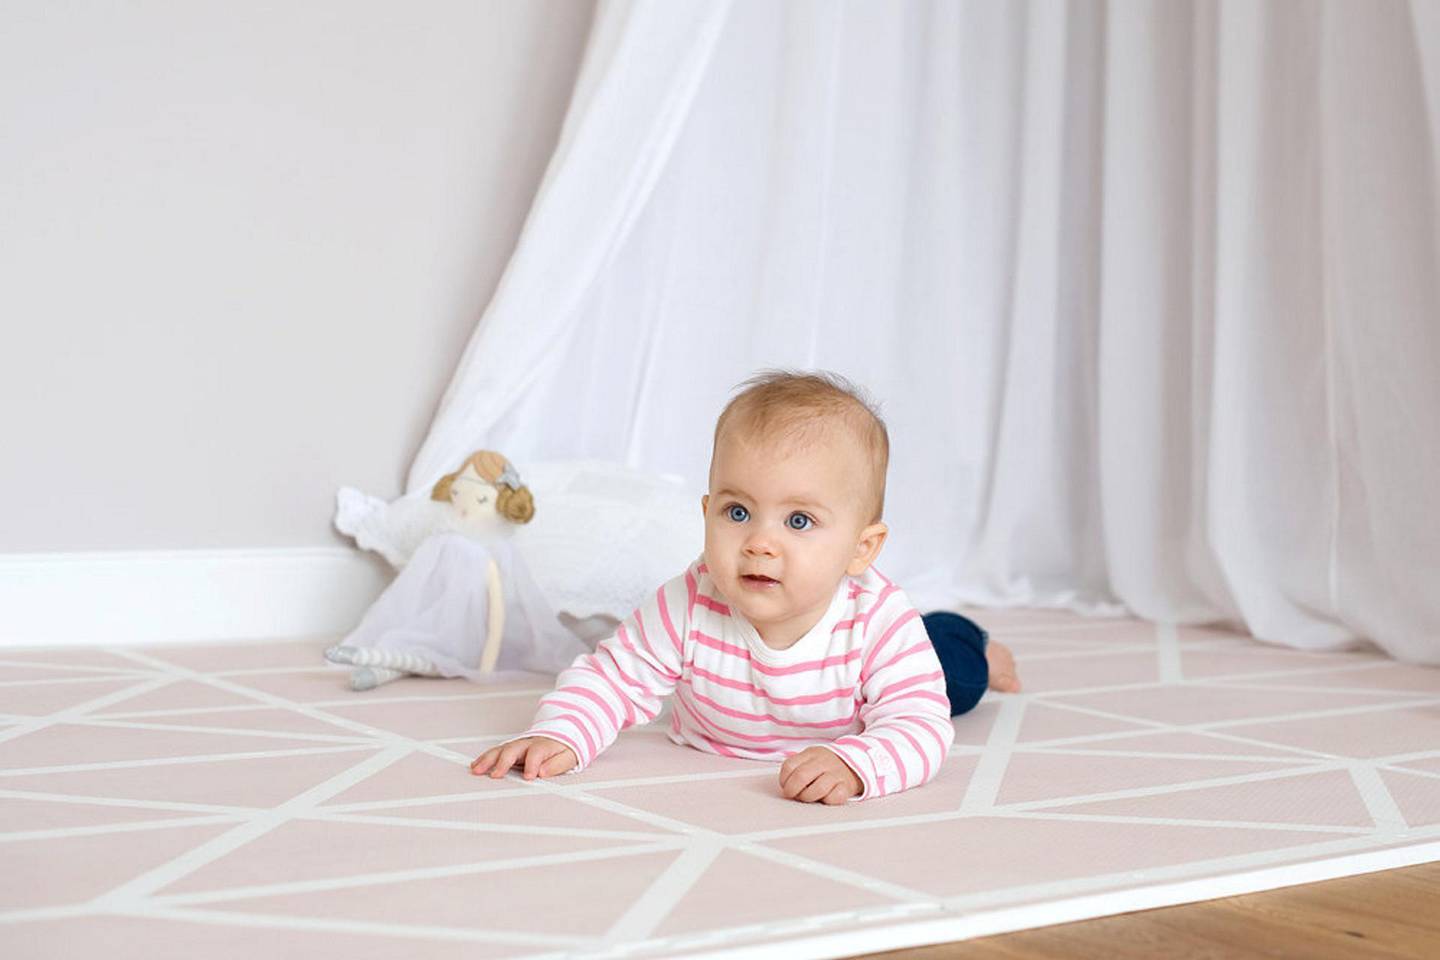 Babies can roll over on their tummies between 3 and 6 months. Courtesy Babysouq